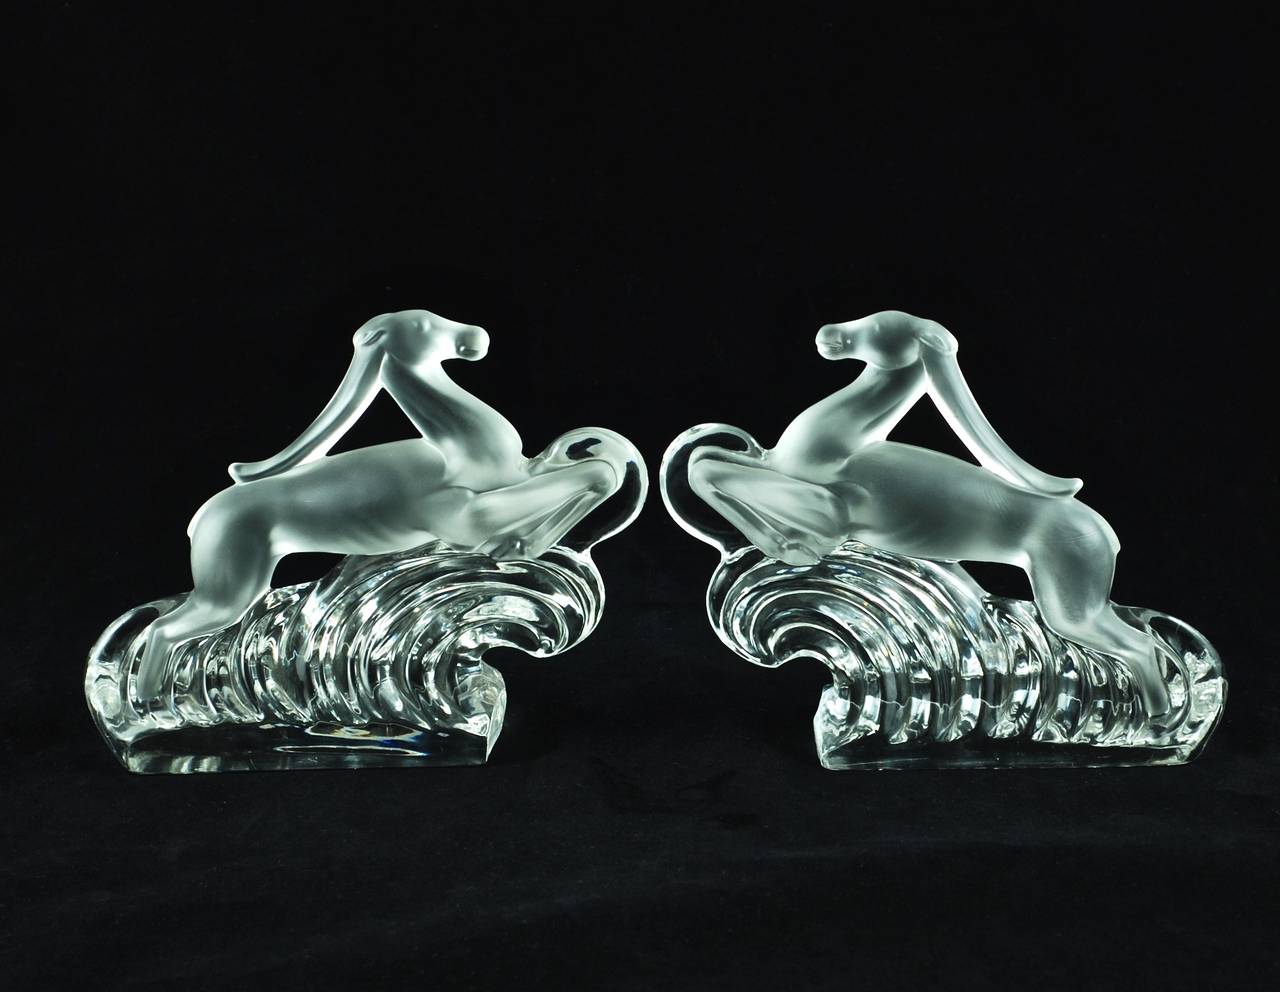 Steuben Glass gazelle bookends. This rare pair of highly collectible bookends was made by Steuben Glass of Corning, New York. Steuben Glass Works was founded by Frederick Carder and Thomas Hawkes in 1903, and produced highly sought after art glass